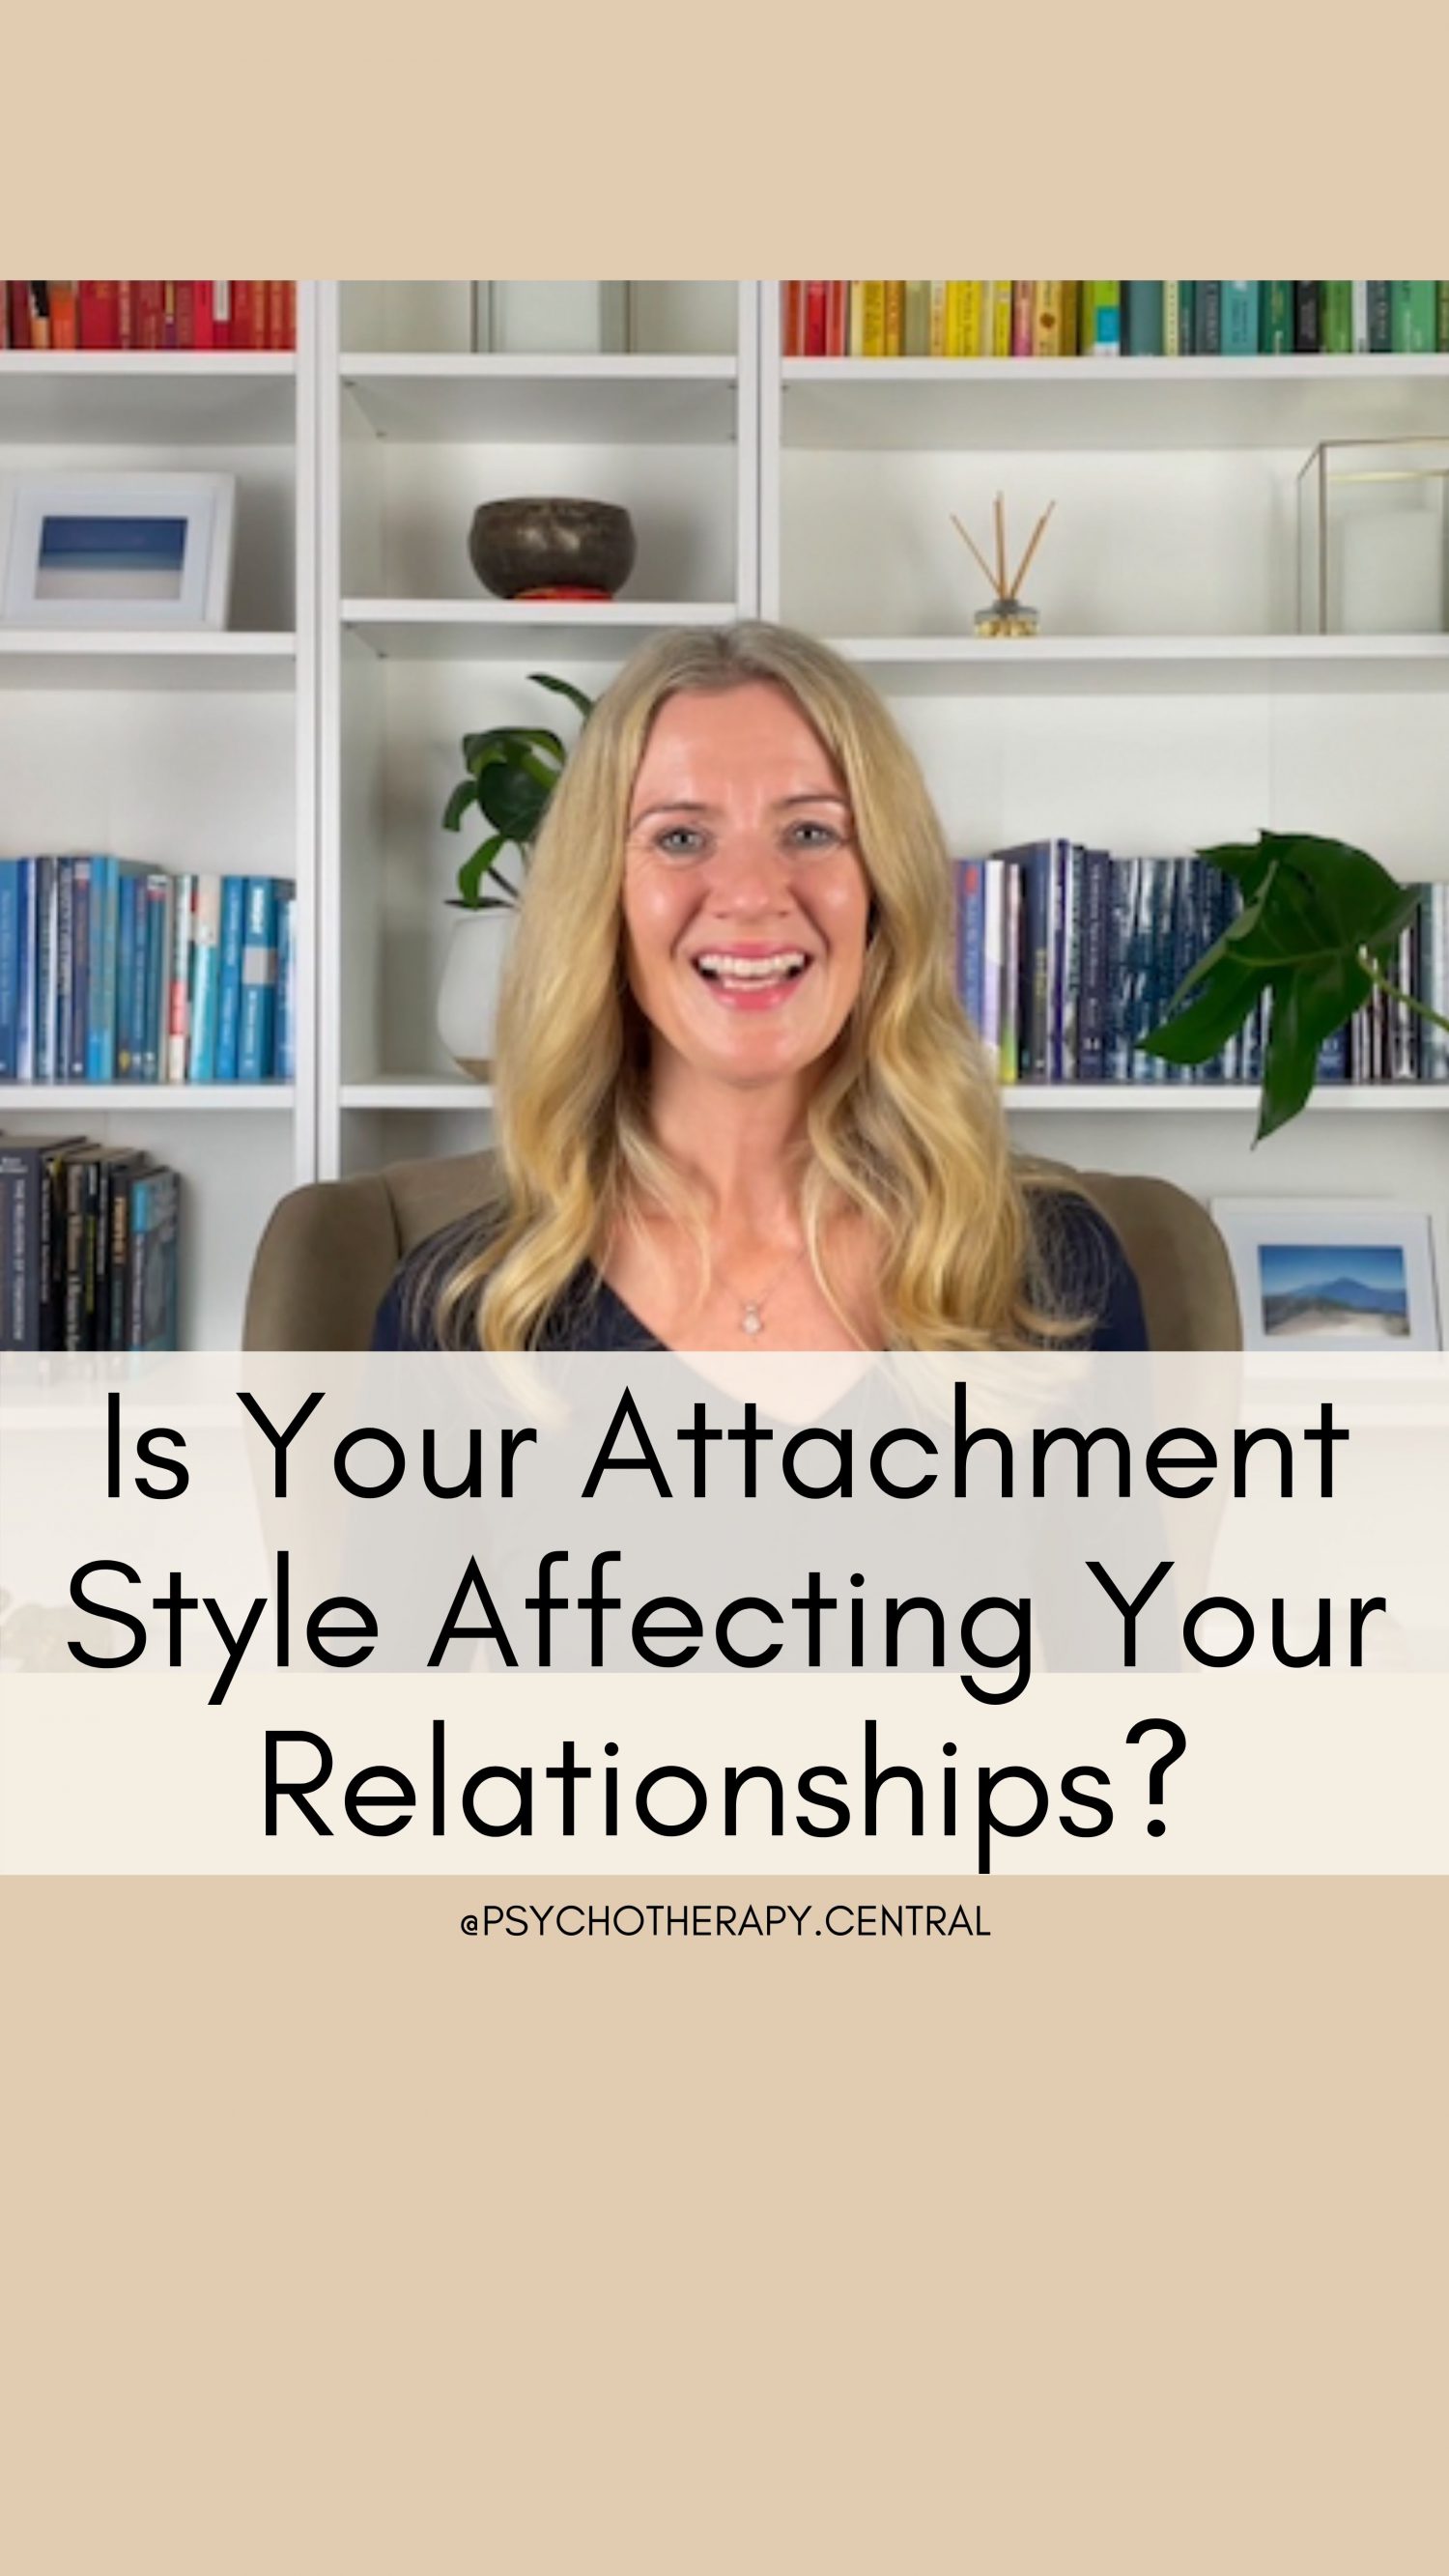 s Your Attachment Style Affecting Your Relationships?